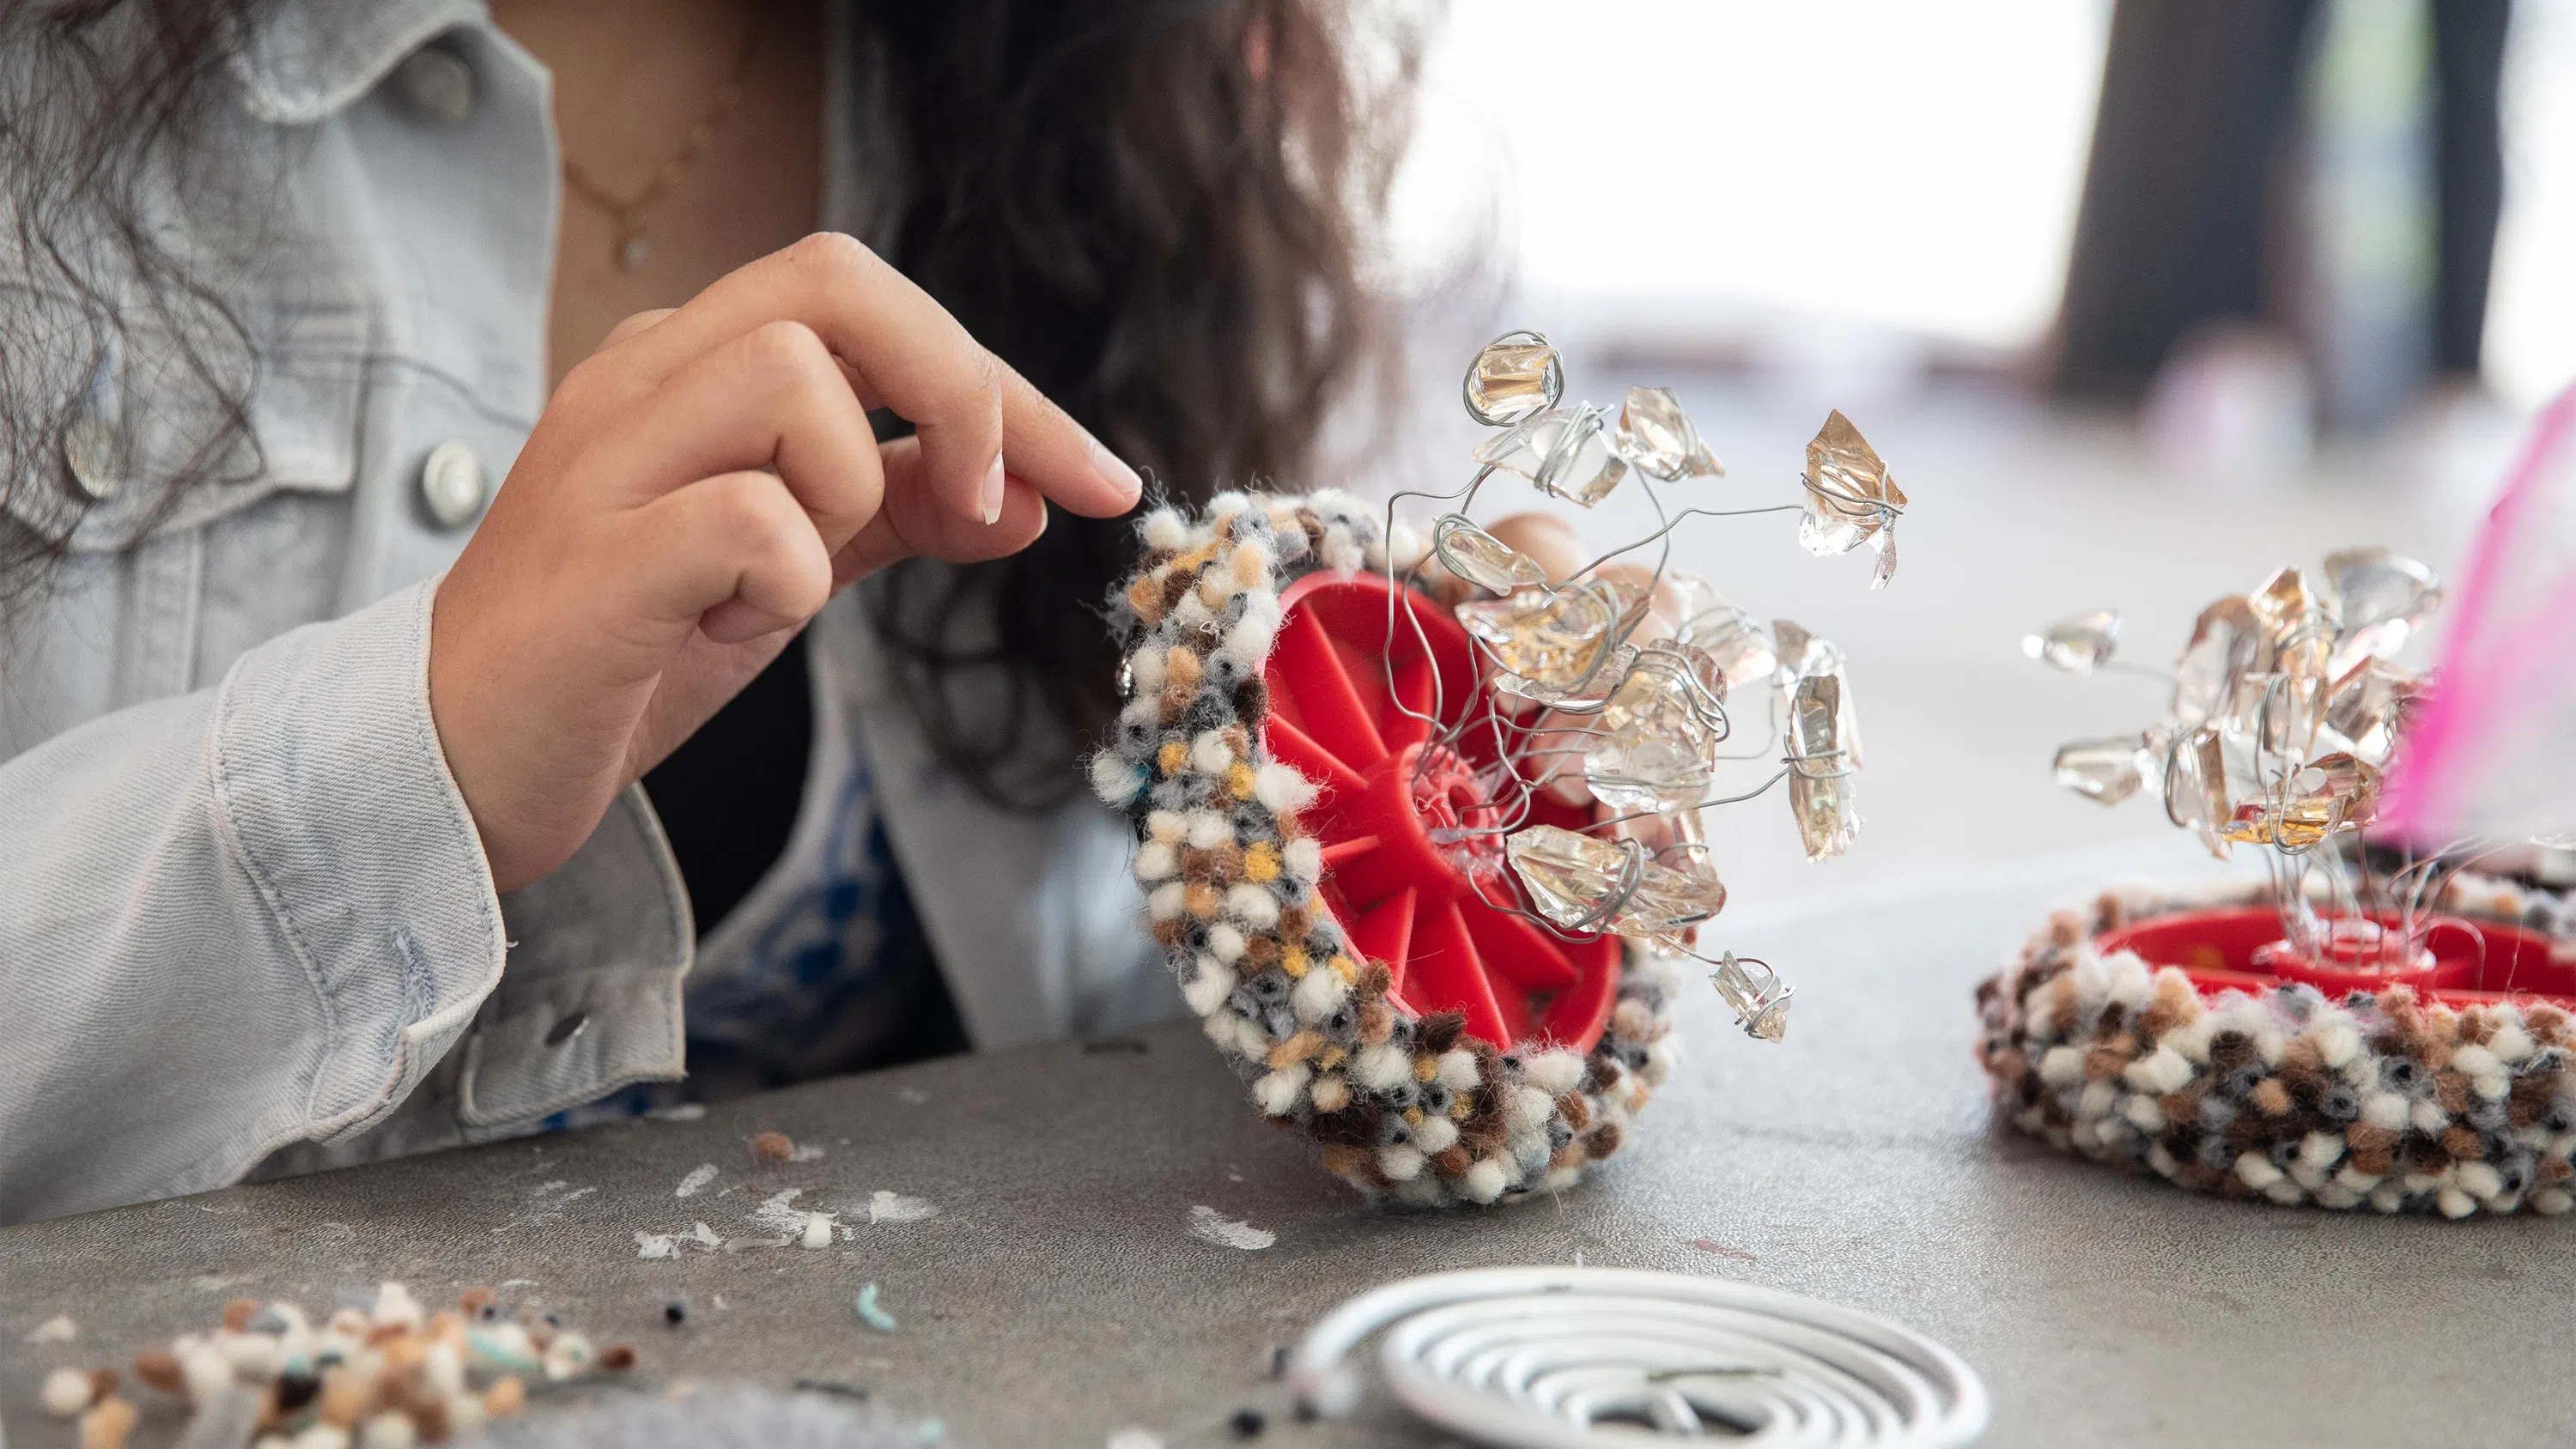 A close-up view of a student working on a flower-like sculpture made of wire, beads, and plastic.